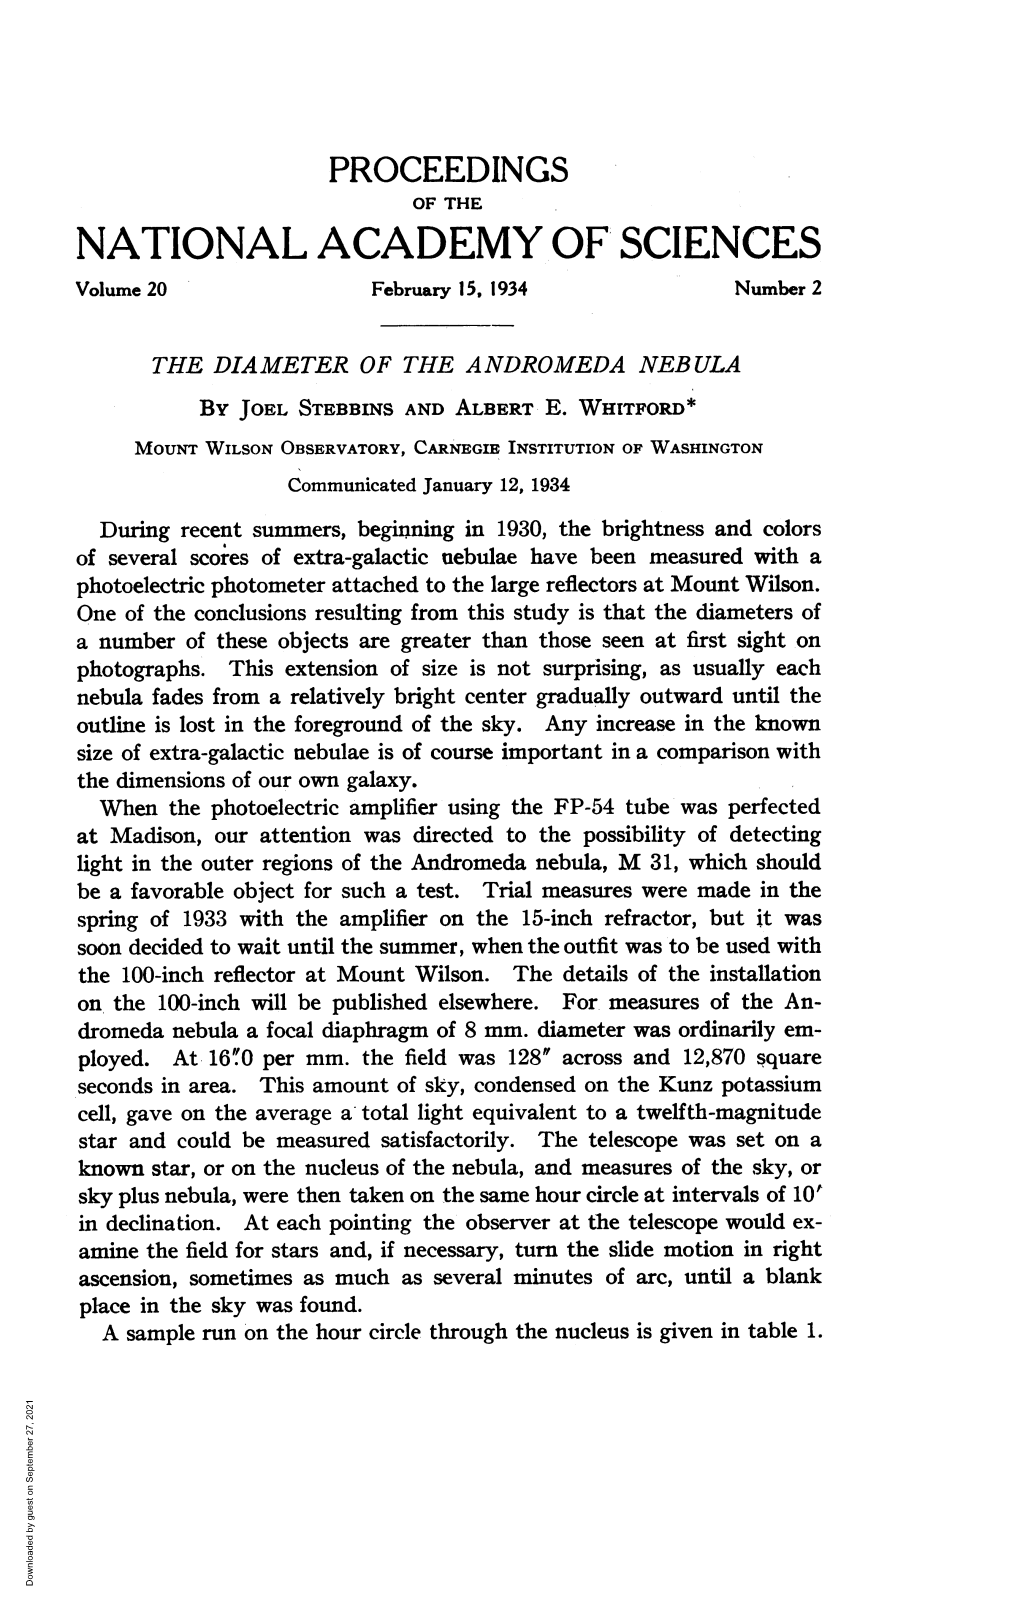 NATIONAL ACADEMY of SCIENCES Volume 20 February 15, 1934 Number 2